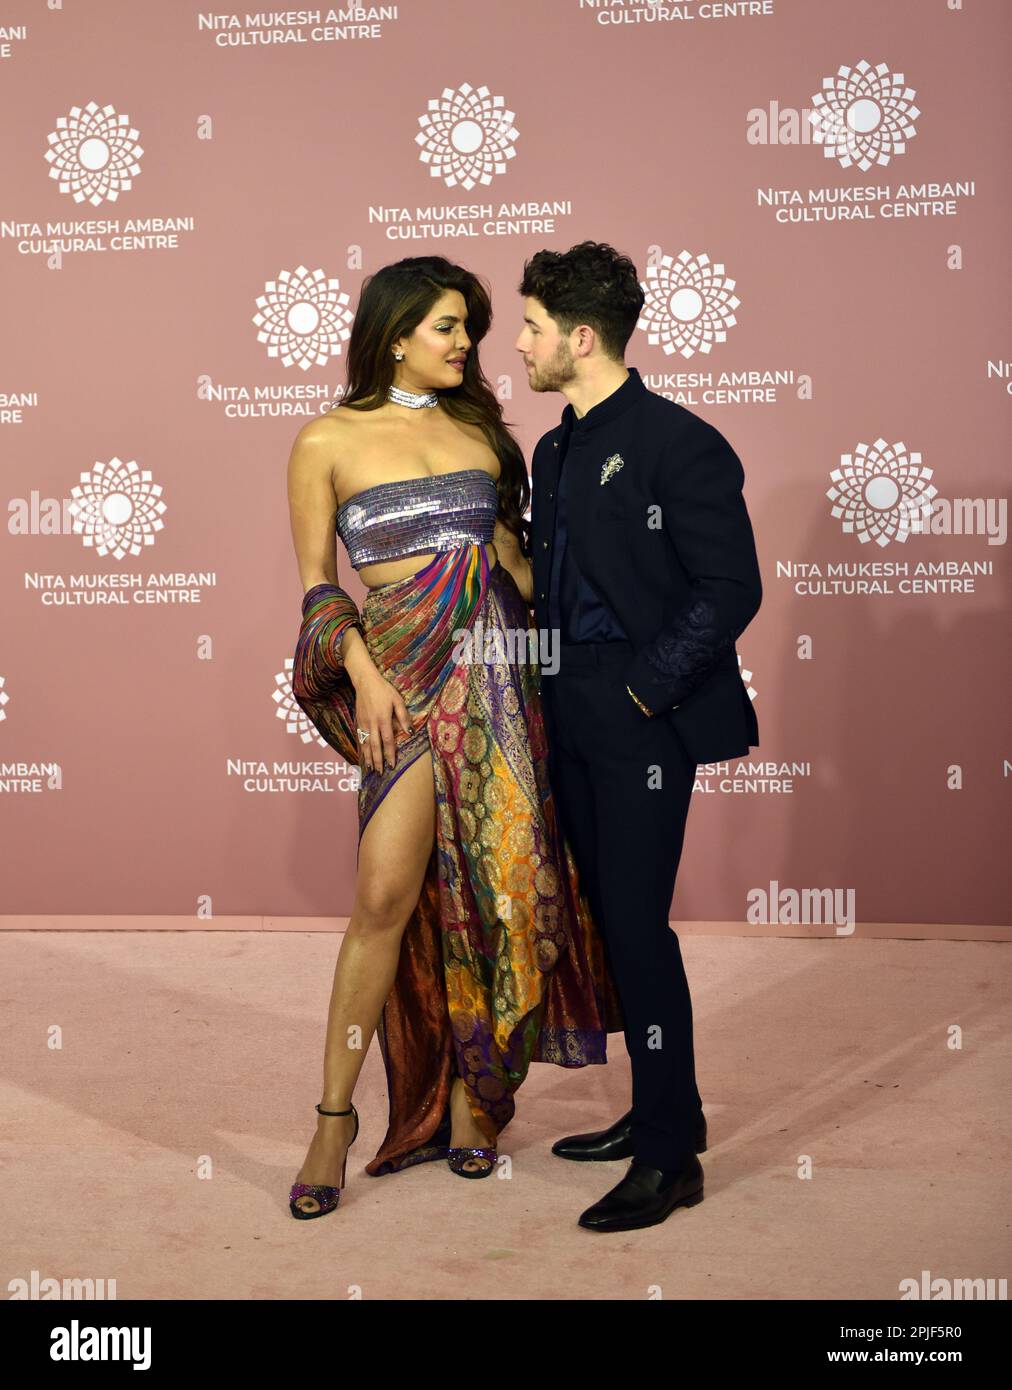 Indian actress Priyanka Chopra Jonas (L) and her husband Nick Jonas (R) pose for a photo shoot on the red carpet during the second day of the opening of Nita Mukesh Ambani Cultural Centre in Mumbai, India, 01 April, 2023. (Photo by Indranil Aditya/NurPhoto) Credit: NurPhoto SRL/Alamy Live News Stock Photo